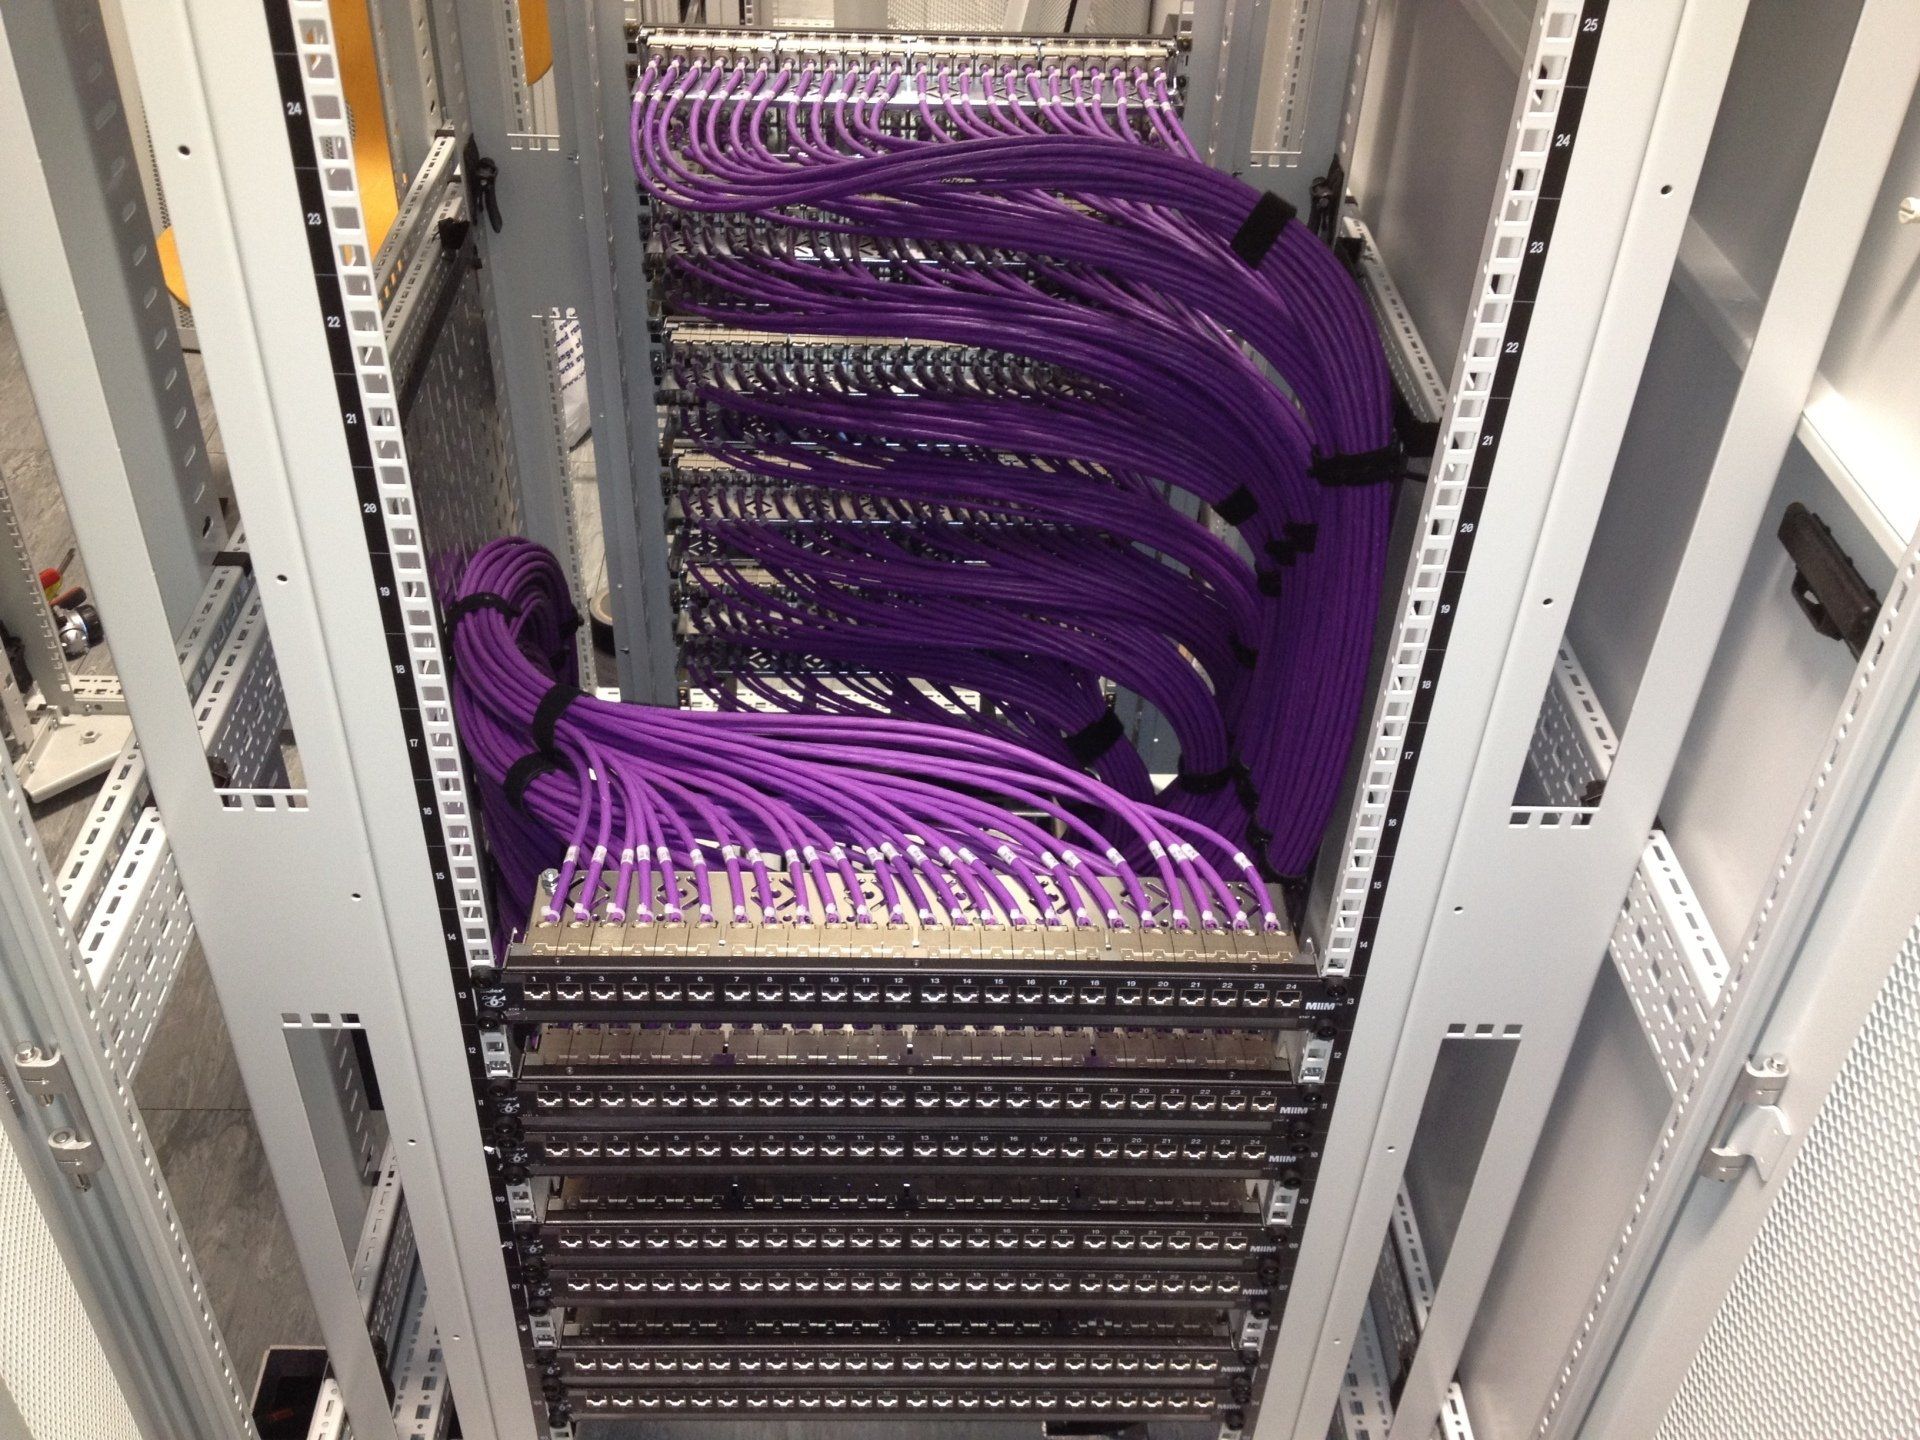 purple data cables installed